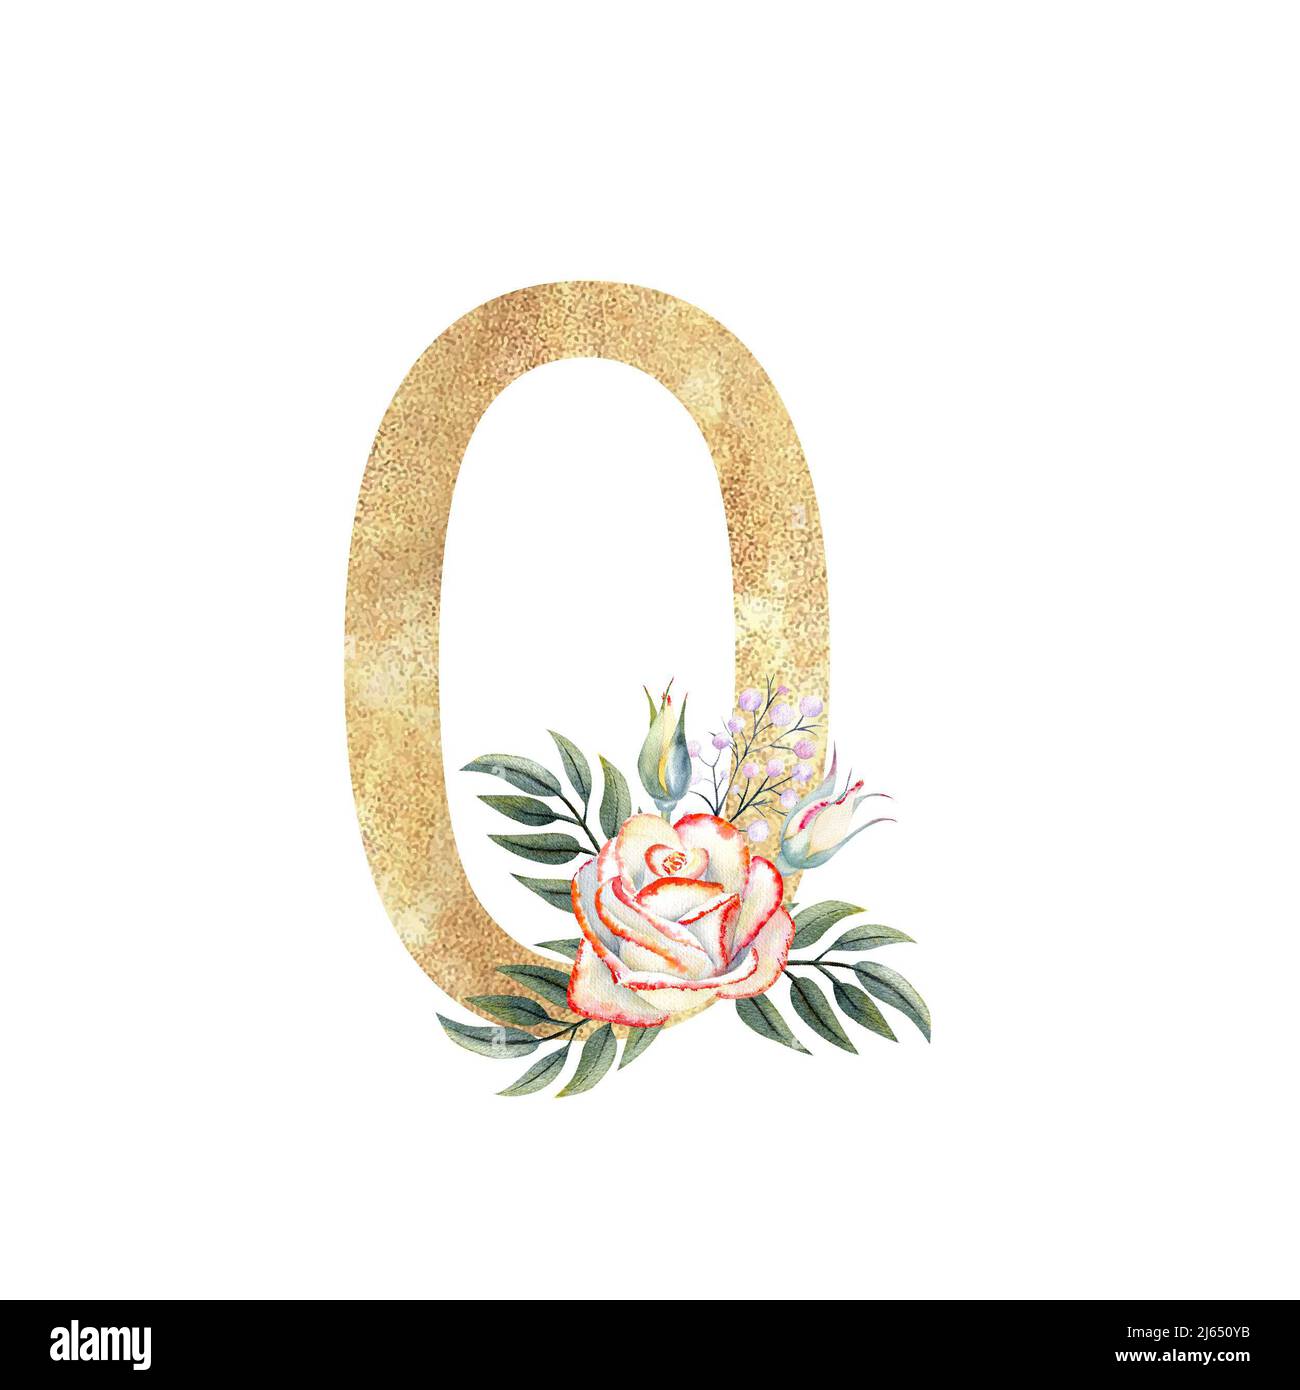 Golden number 0 with a bouquet of pink roses on a white isolated background. Hand-drawn watercolor illustration Stock Photo